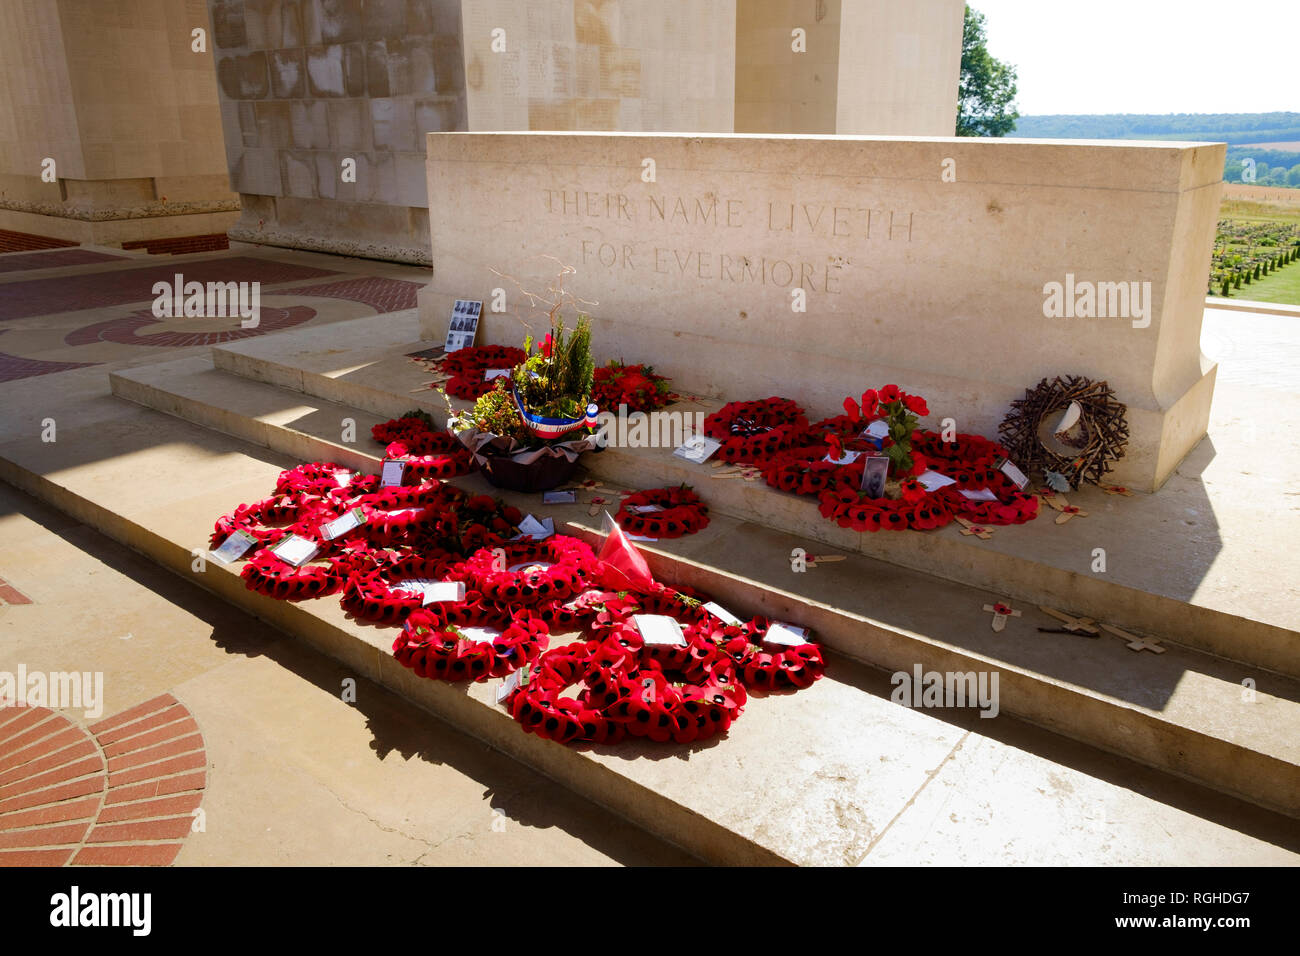 The Stone of Remembrance at The Thiepval Memorial engraved Their Name Liveth For Evermore - The memorial dedicated to the soldiers & officers missing  Stock Photo